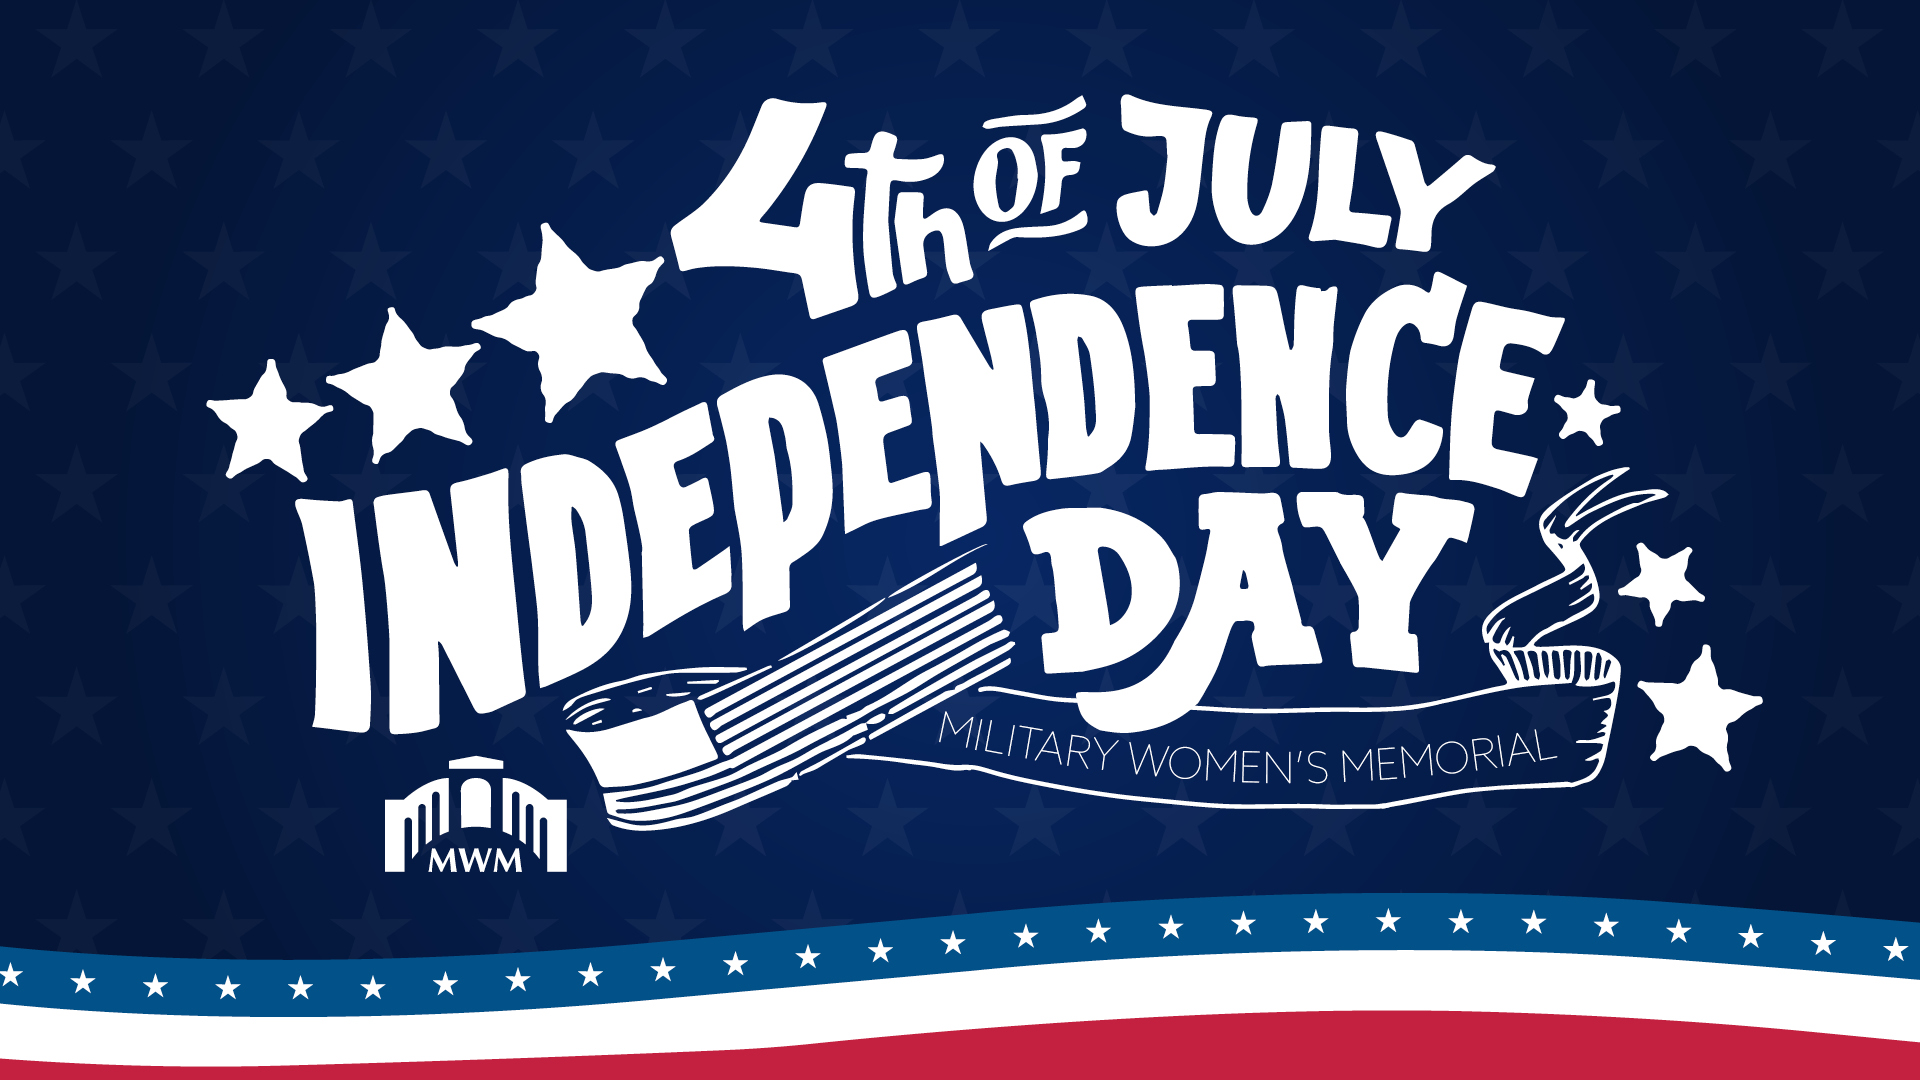 Red, white and blue background with a retro 4th of July Independence Day graphic with a US flag.